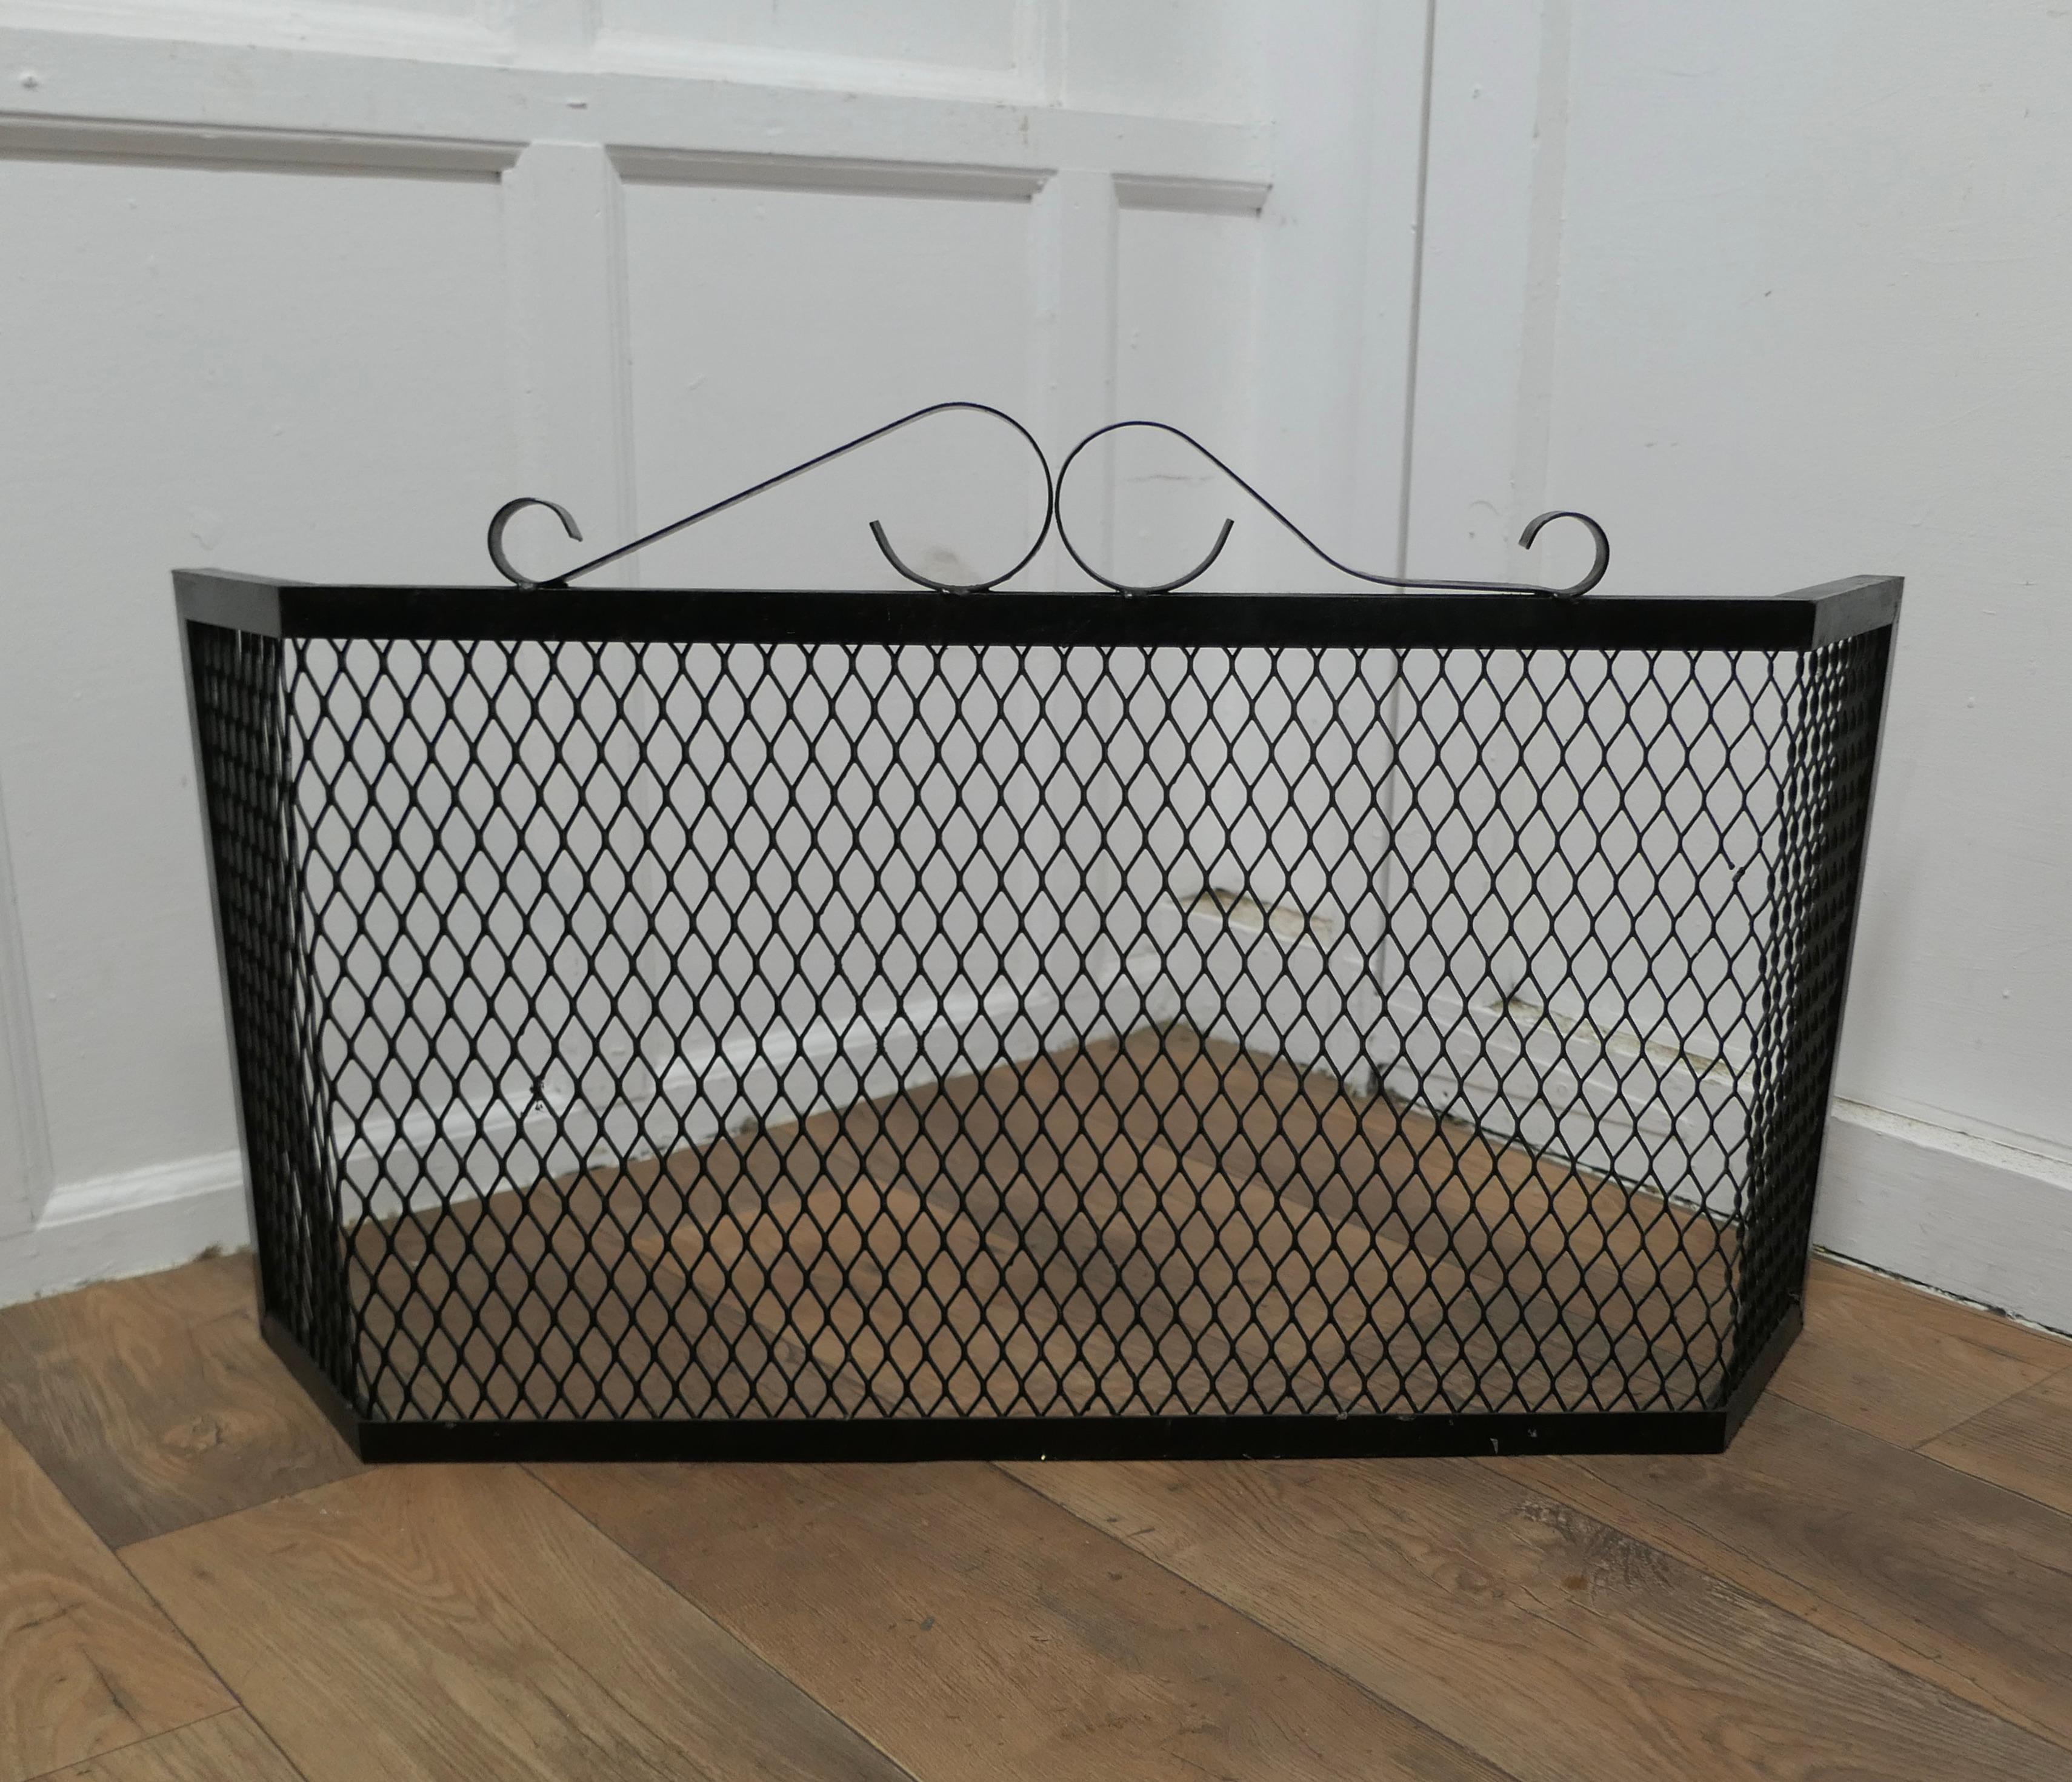 Unusual Heavy Iron Fire Guard 

This is an unusual Fireguard, the guard is made in Iron, both the frame and the mesh, it has a shaped front to enclosed the fire
The guard is in good condition and very steady when in use
The guard is 22” high, it is